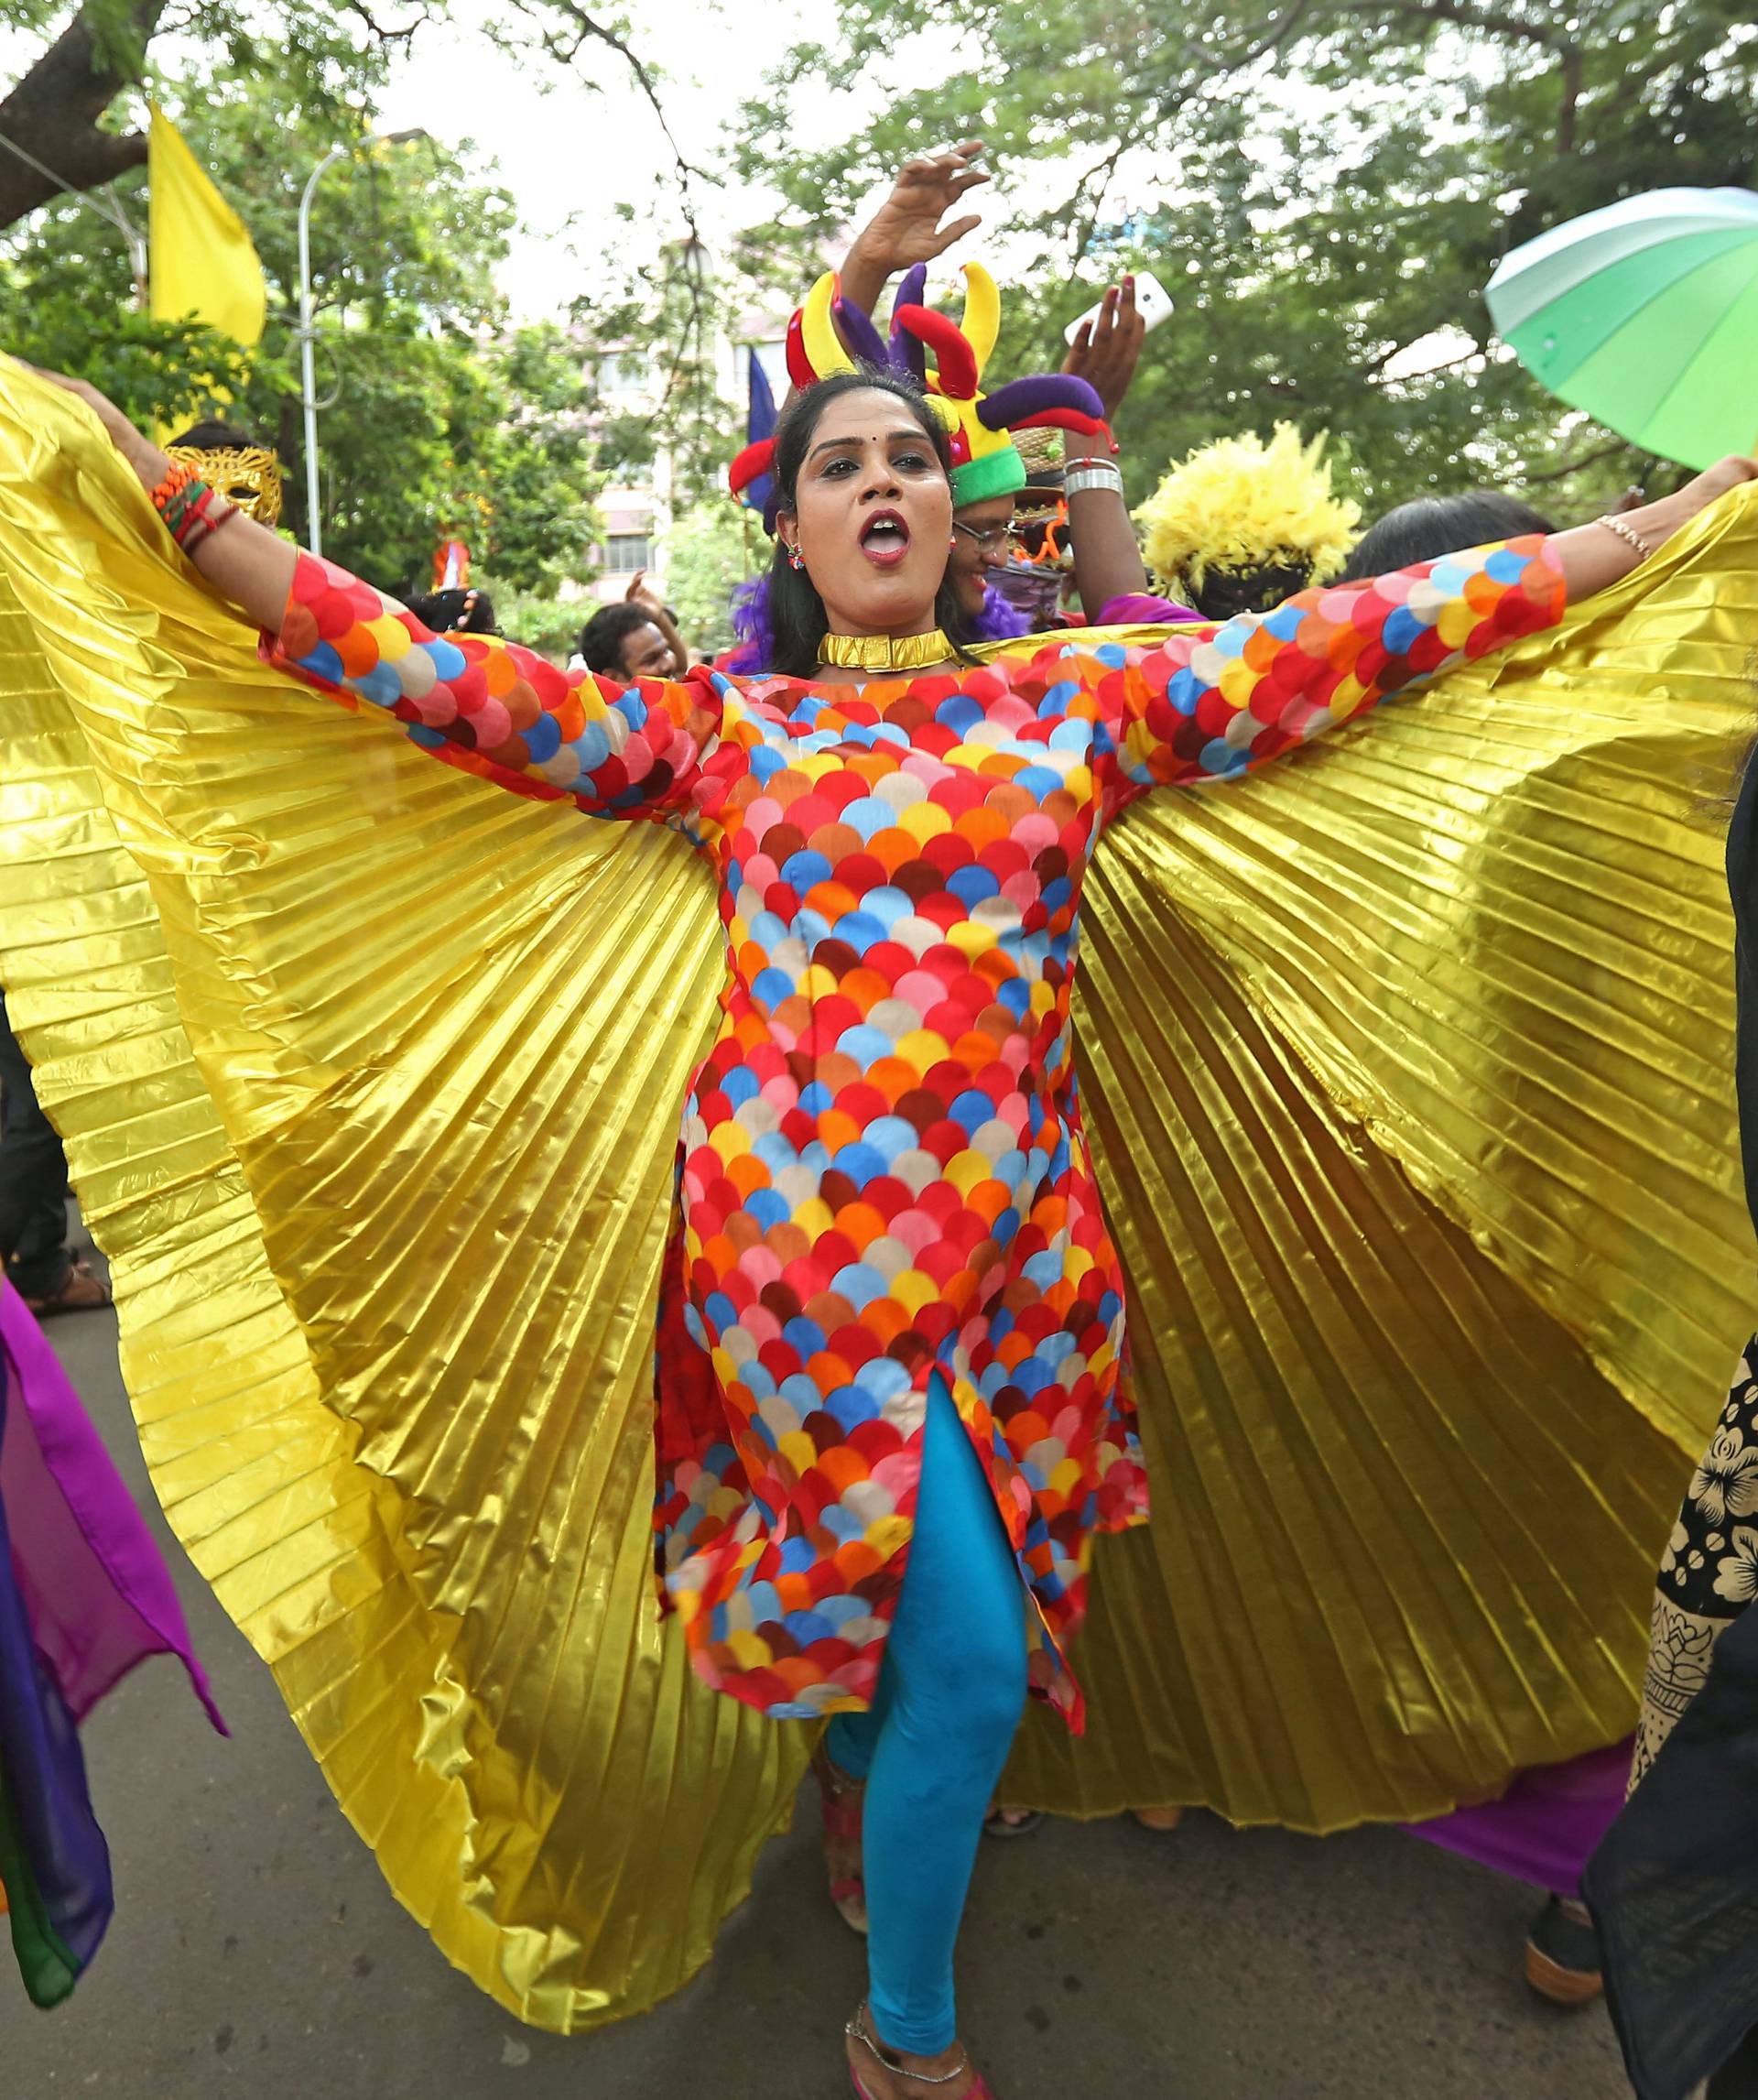 Participants dance during a gay pride parade promoting lesbian, gay, bisexual and transgender rights, in Chennai